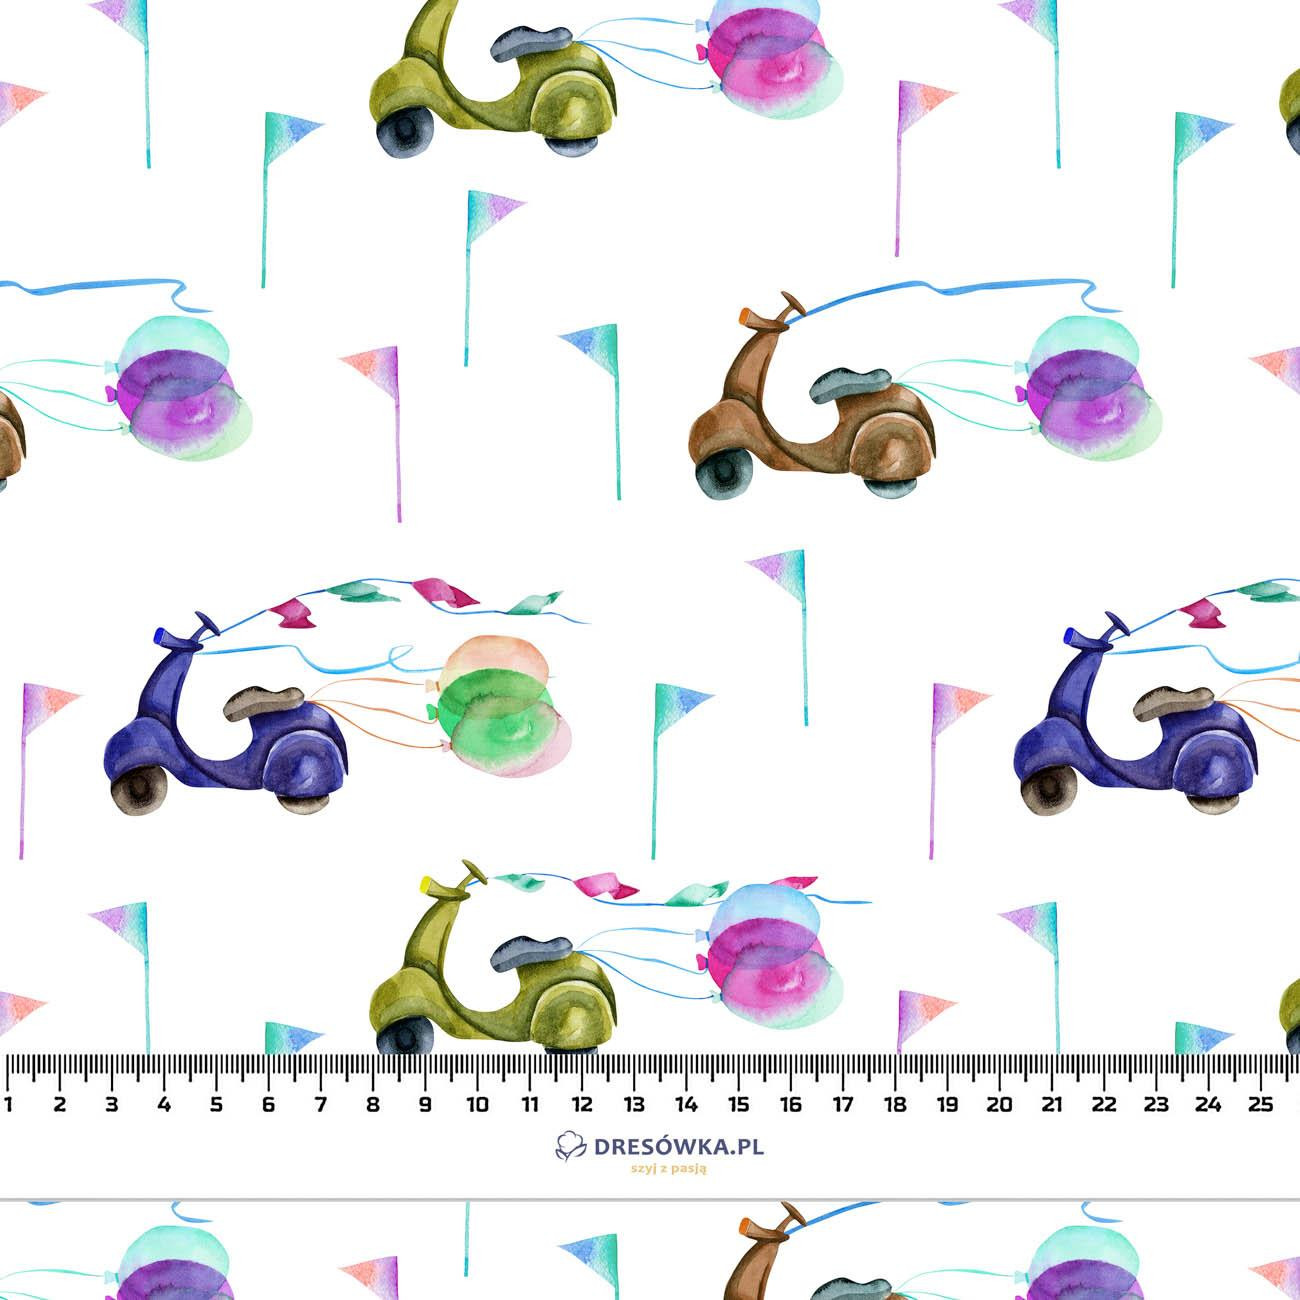 SCOOTERS (COLORFUL TRANSPORT) - Cotton woven fabric